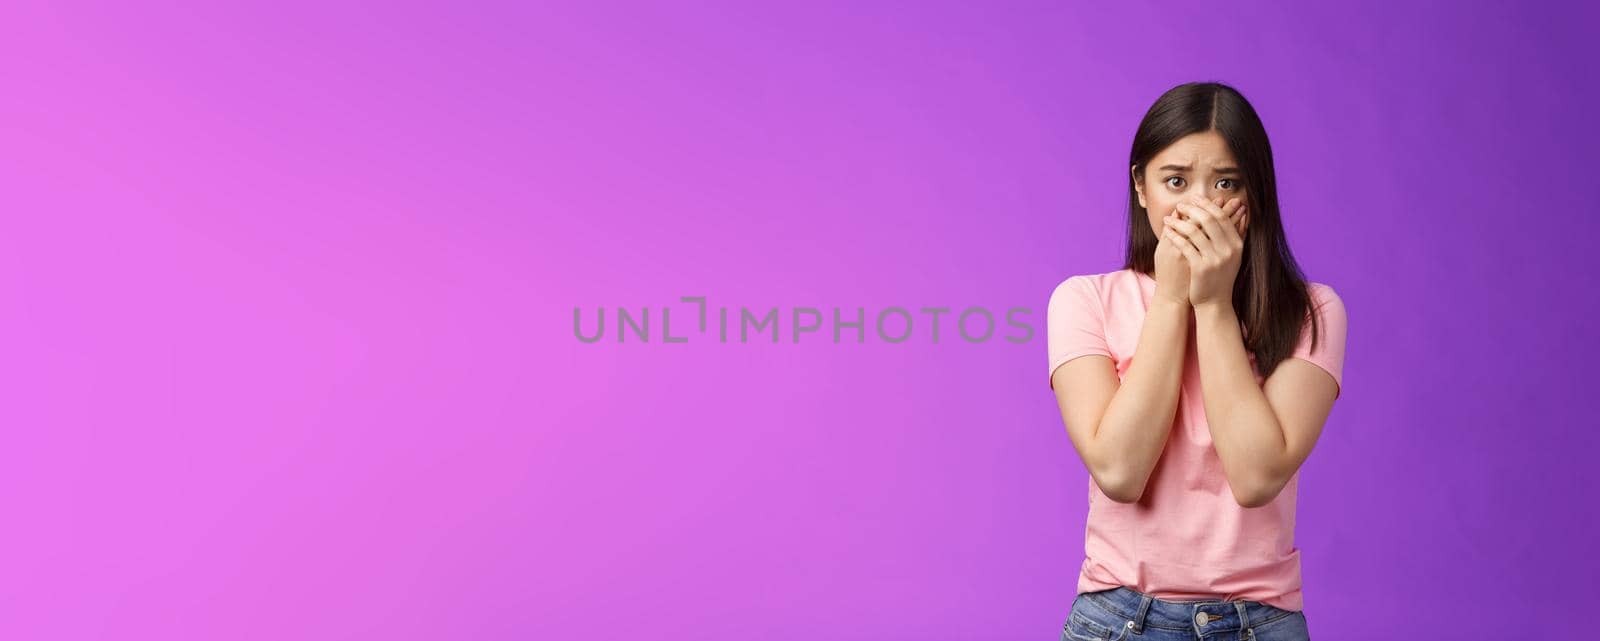 Shocked female asian victim frightened, gasping witness crime, close mouth hands, frowning, stare camera scared upset, make innocent terrified gaze, stand purple background. Copy space